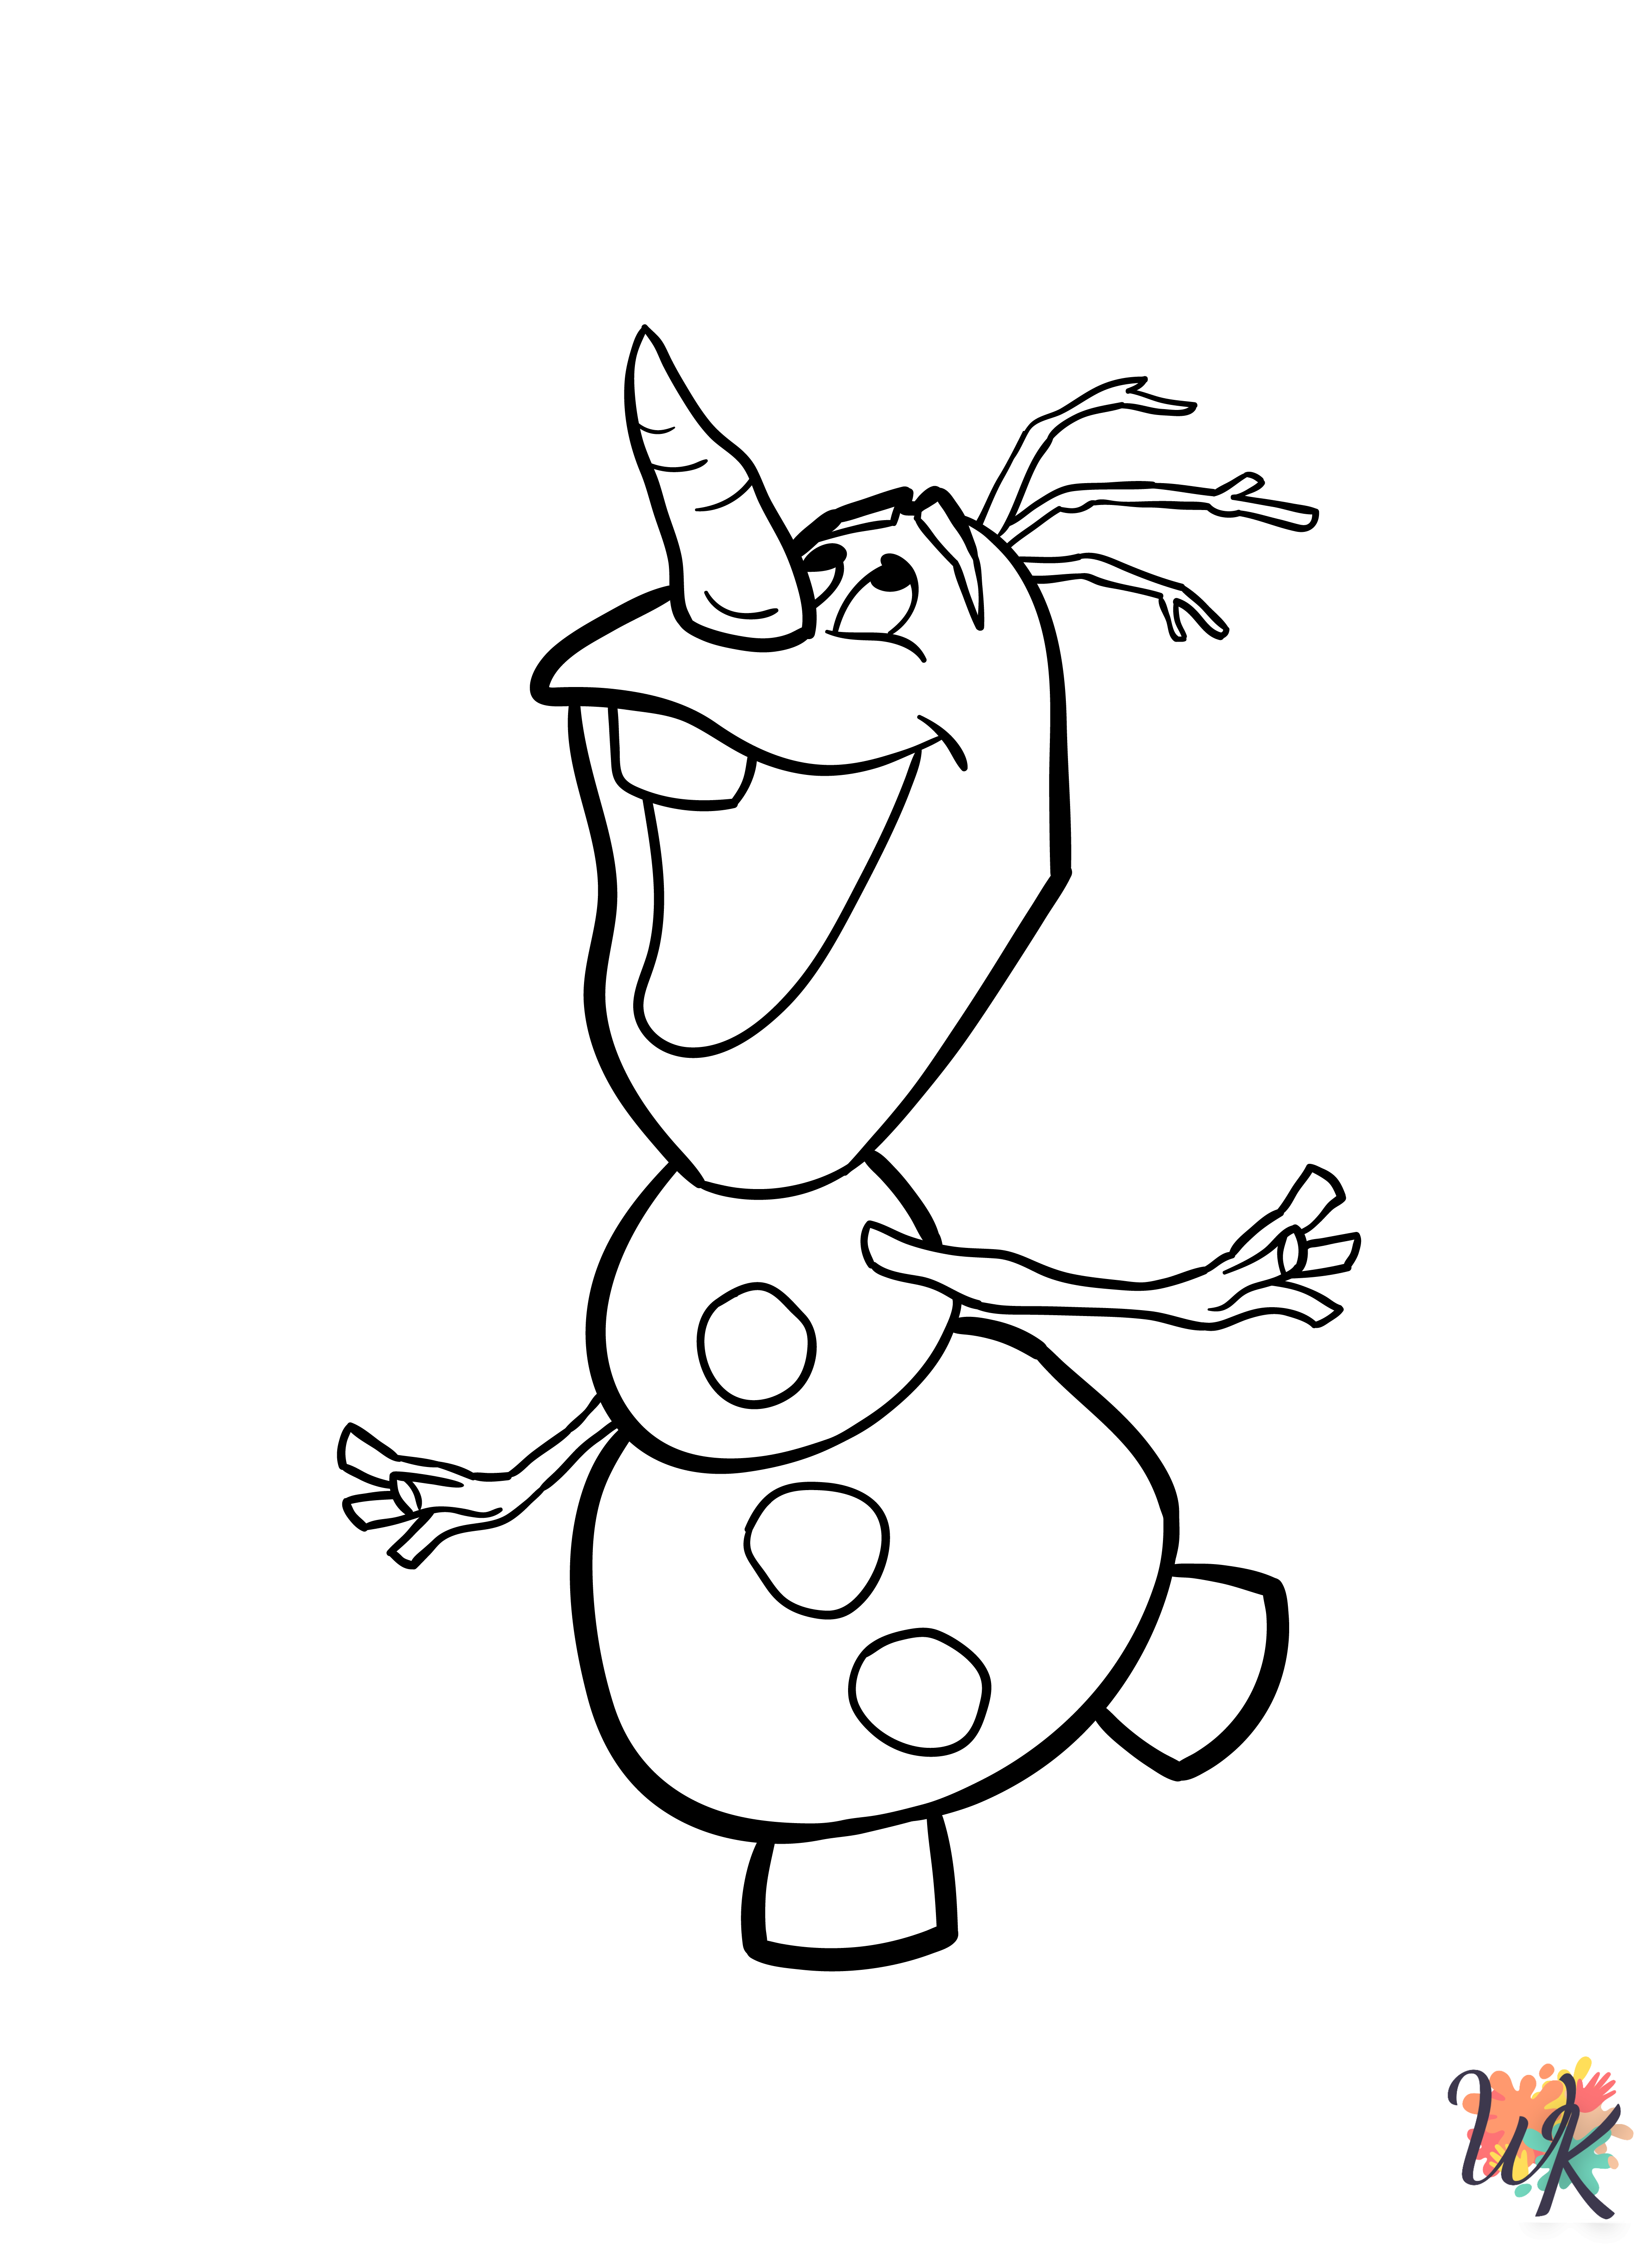 Olaf adult coloring pages